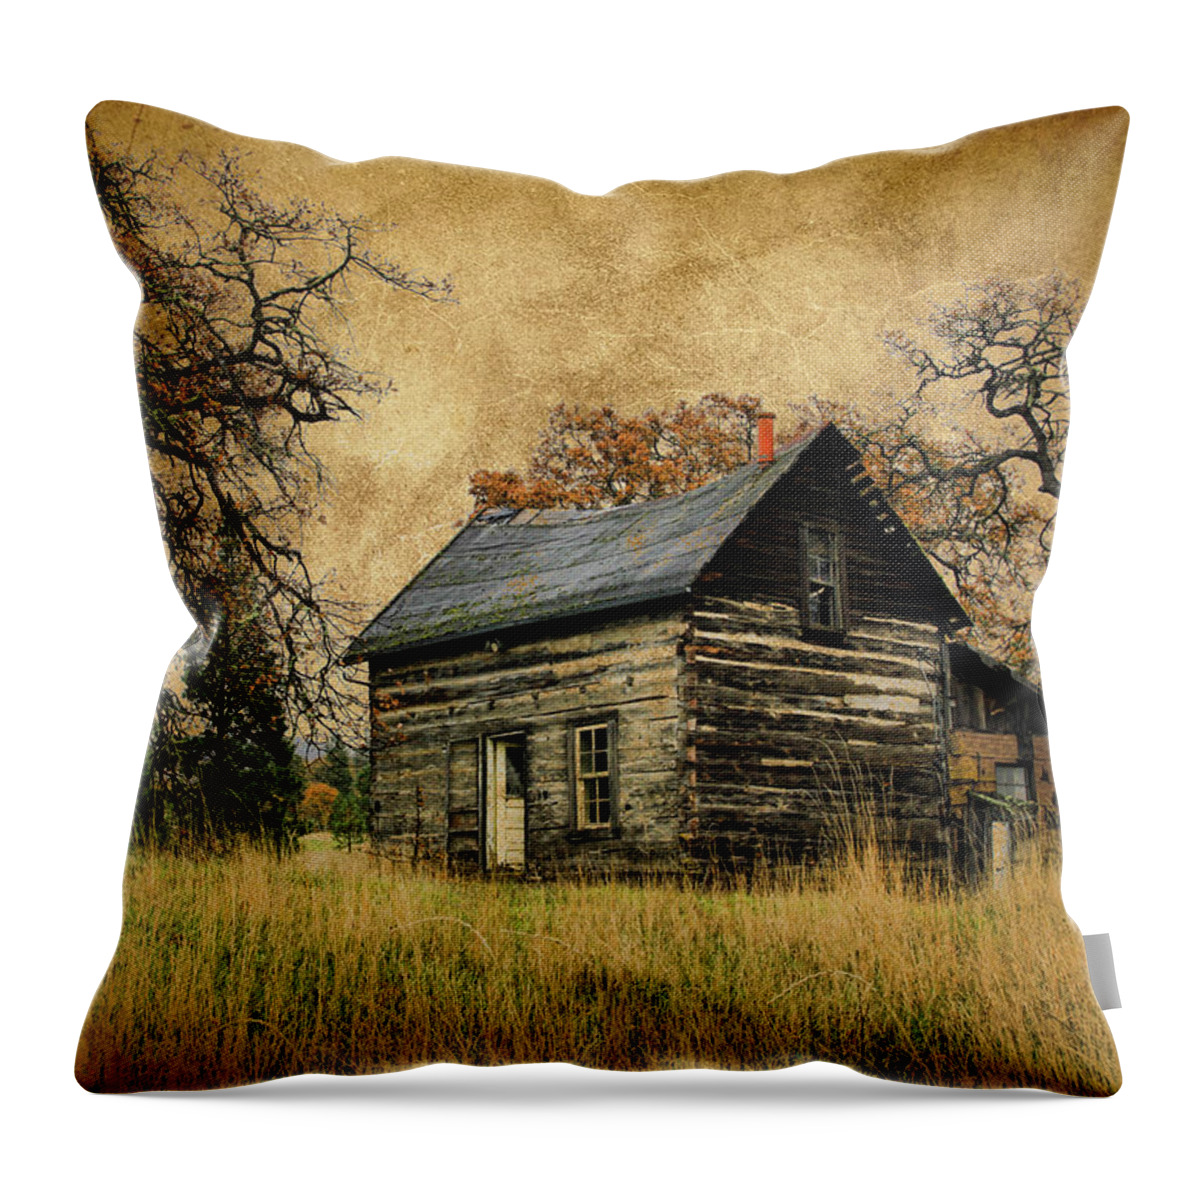 Cabin Throw Pillow featuring the photograph Backwoods Cabin by Steve McKinzie